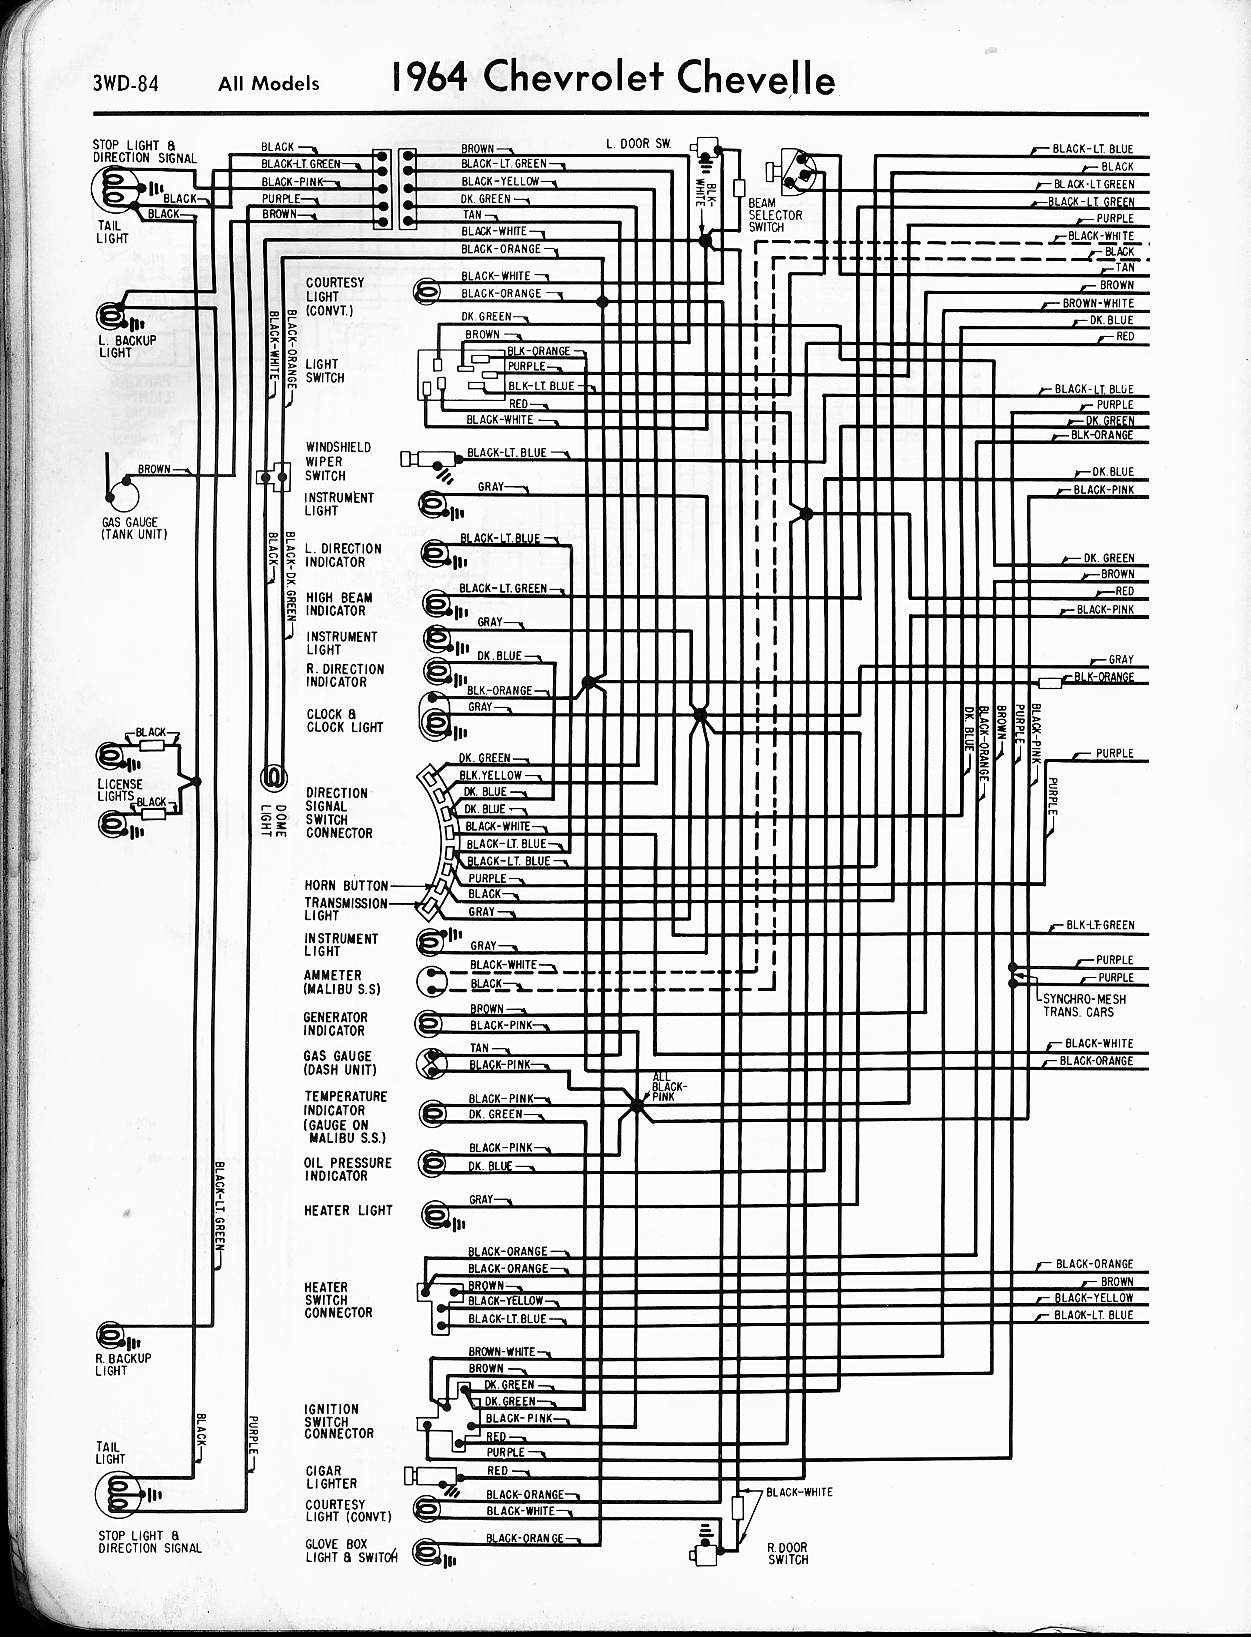 Chevelle Wiring Diagram from www.wiring-wizard.com